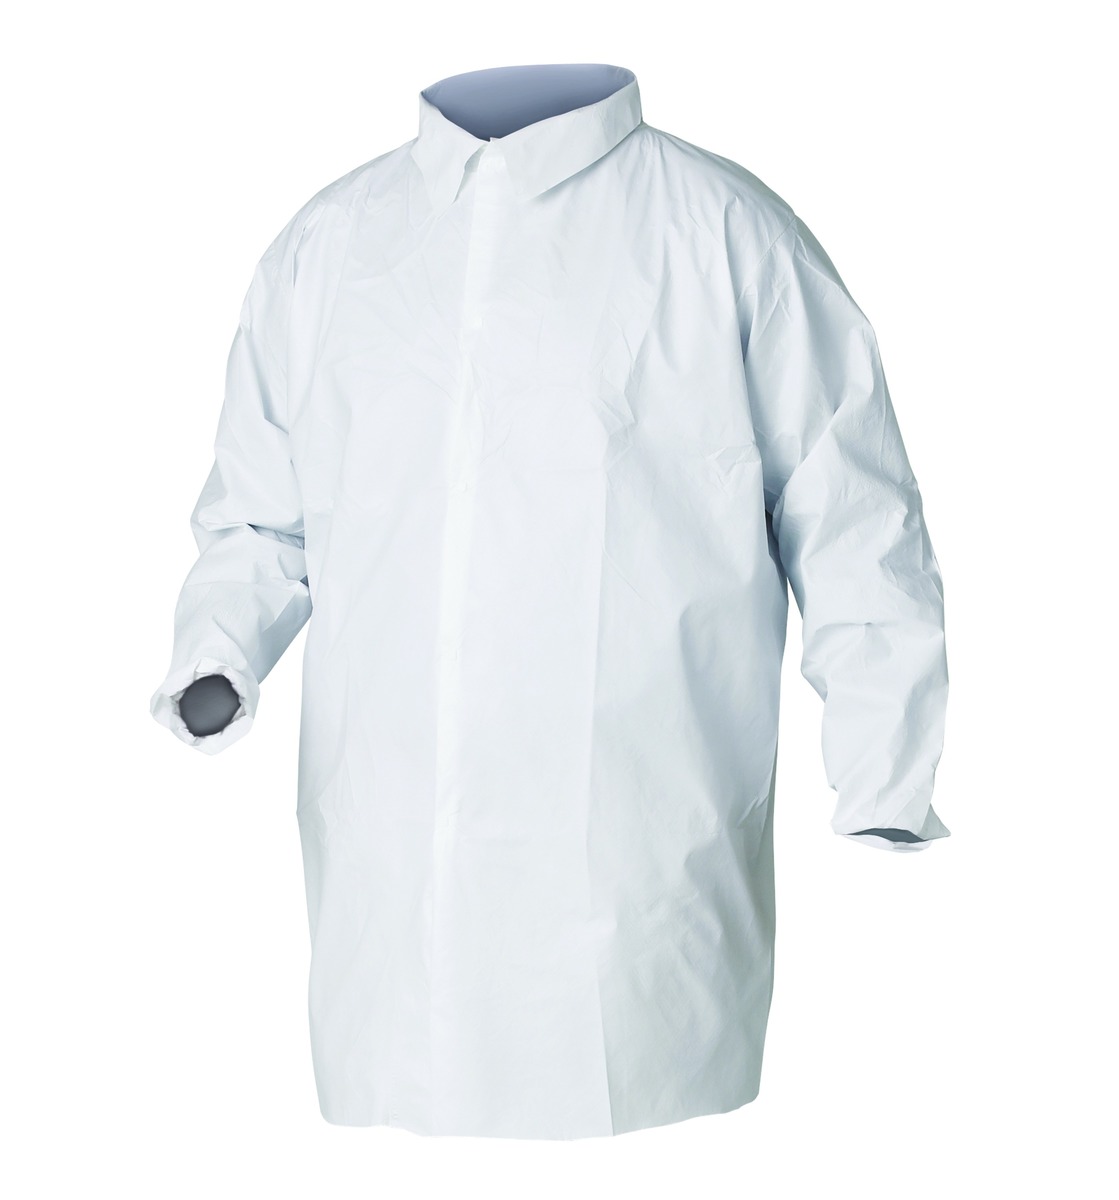 Kimberly-Clark Professional* Medium White KleenGuard* A20 SMS Disposable Lab Coat/Lab Jacket (Availability restrictions apply.)